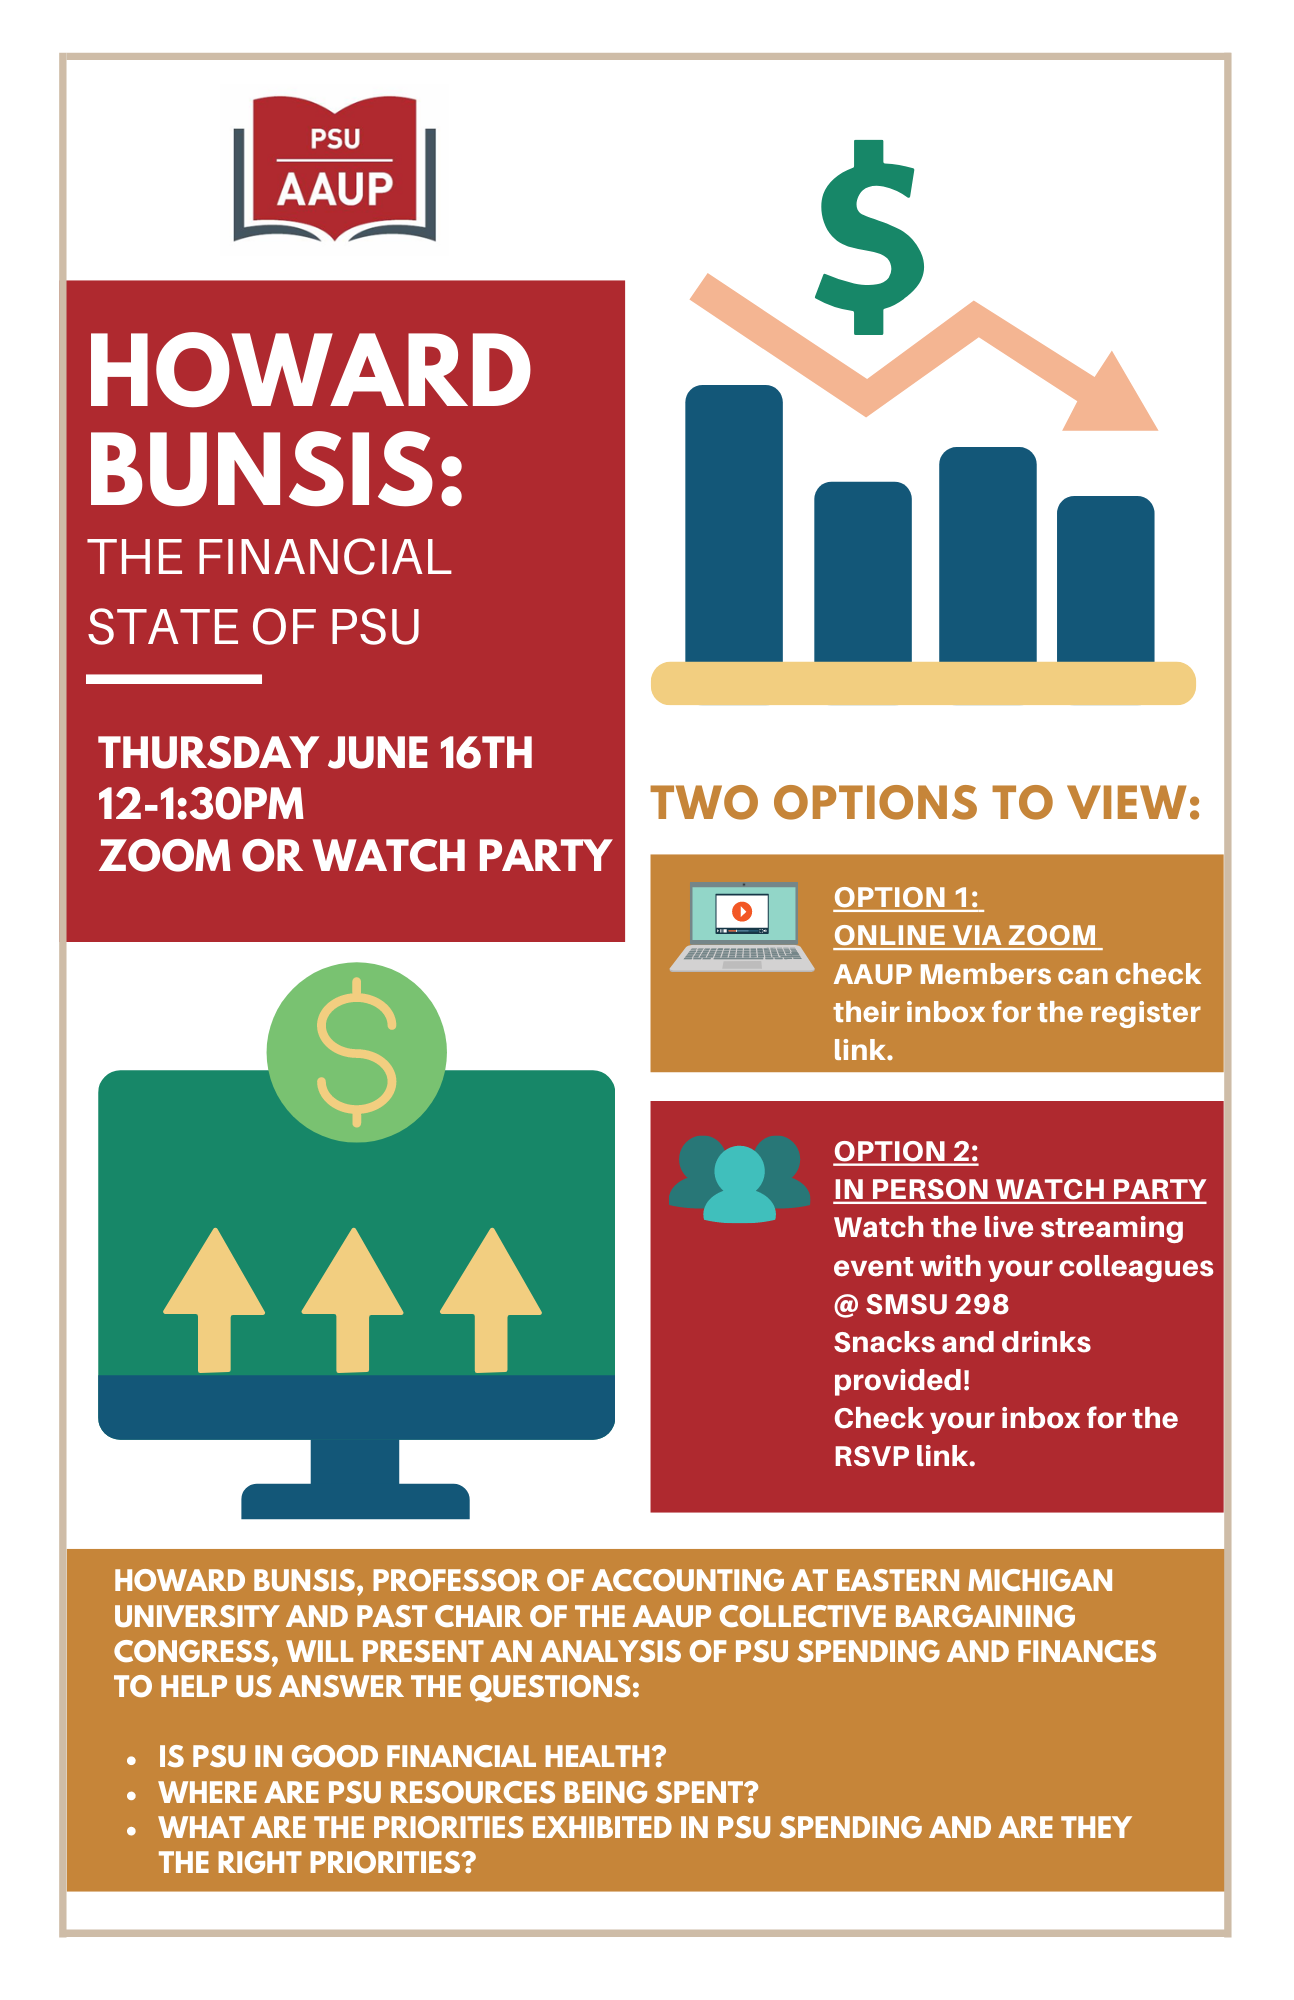 Howard Bunsis: The Financial State of PSU